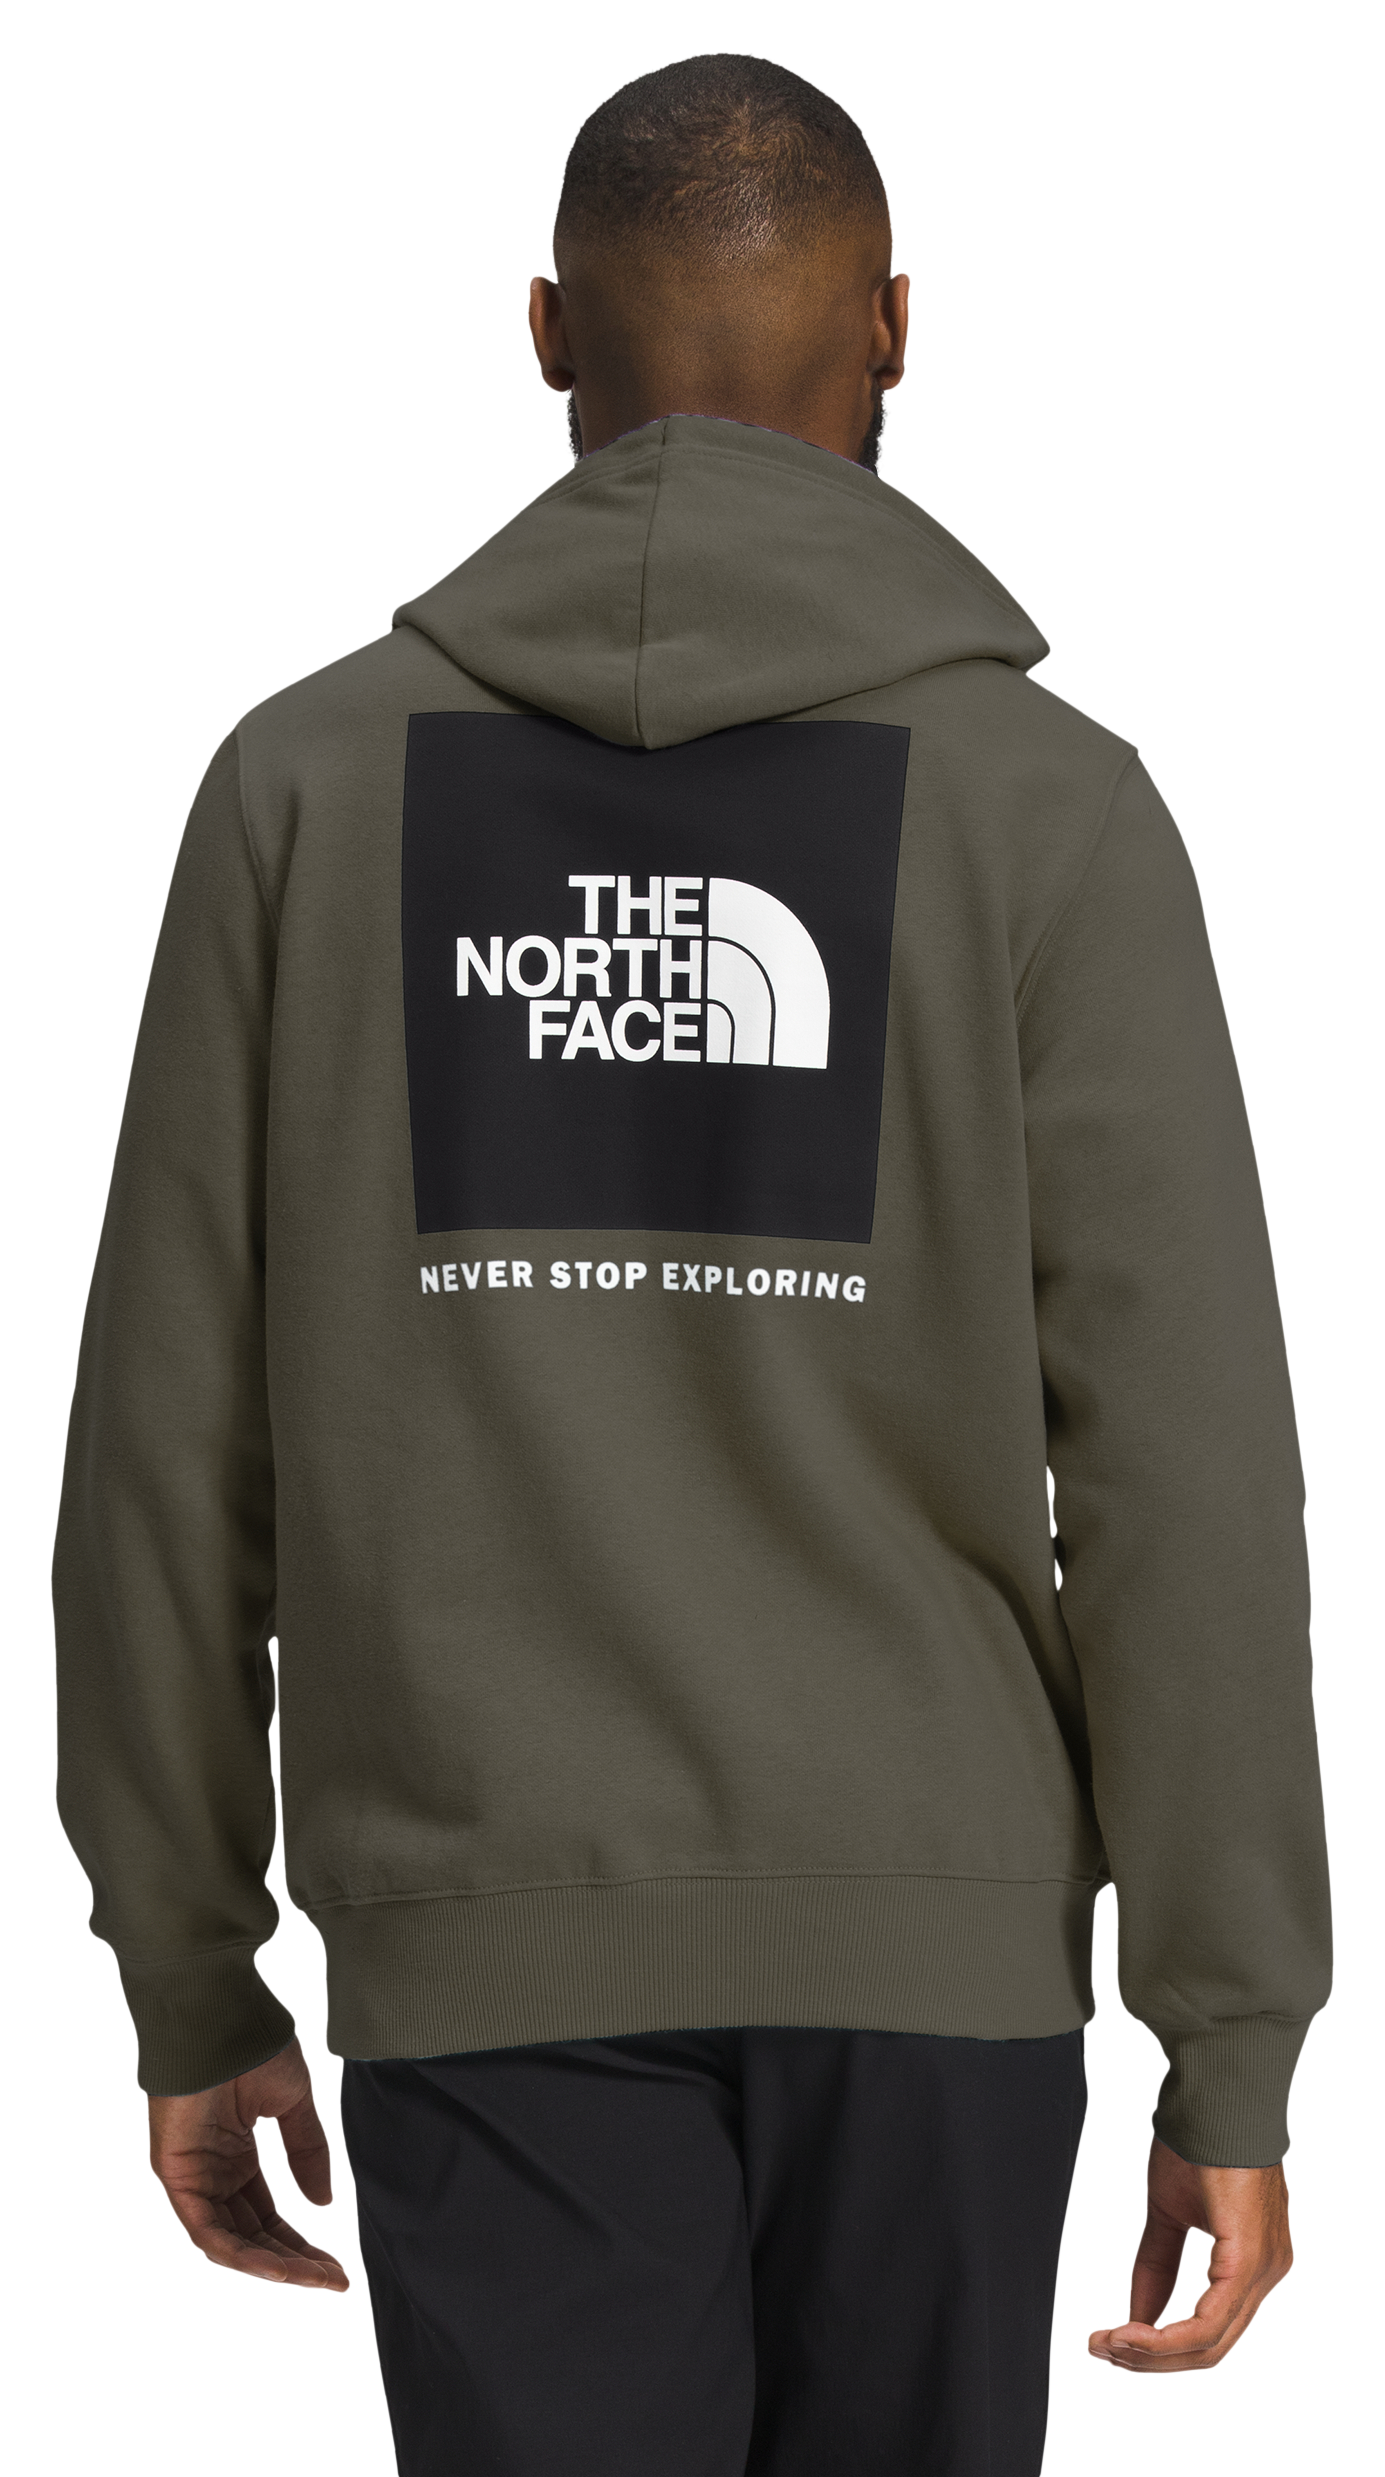 The North Face Box NSE Long-Sleeve Hoodie for Men - New Taupe Green/Black - S